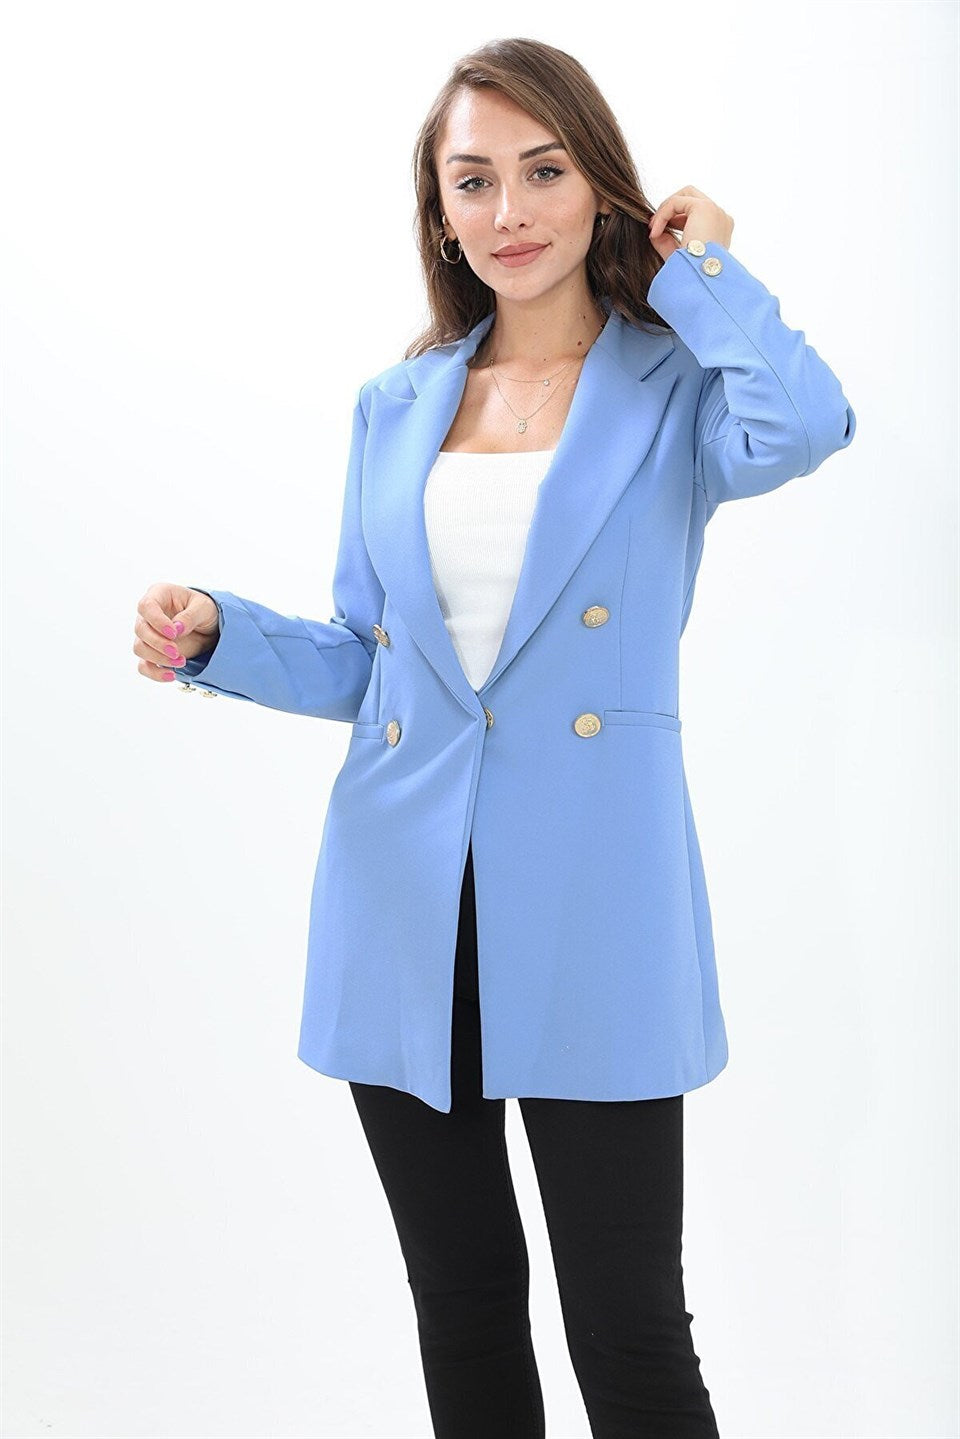 Padded Shoulders with Snap Fasteners on the Front - Women's Blazer Jacket - STREETMODE™